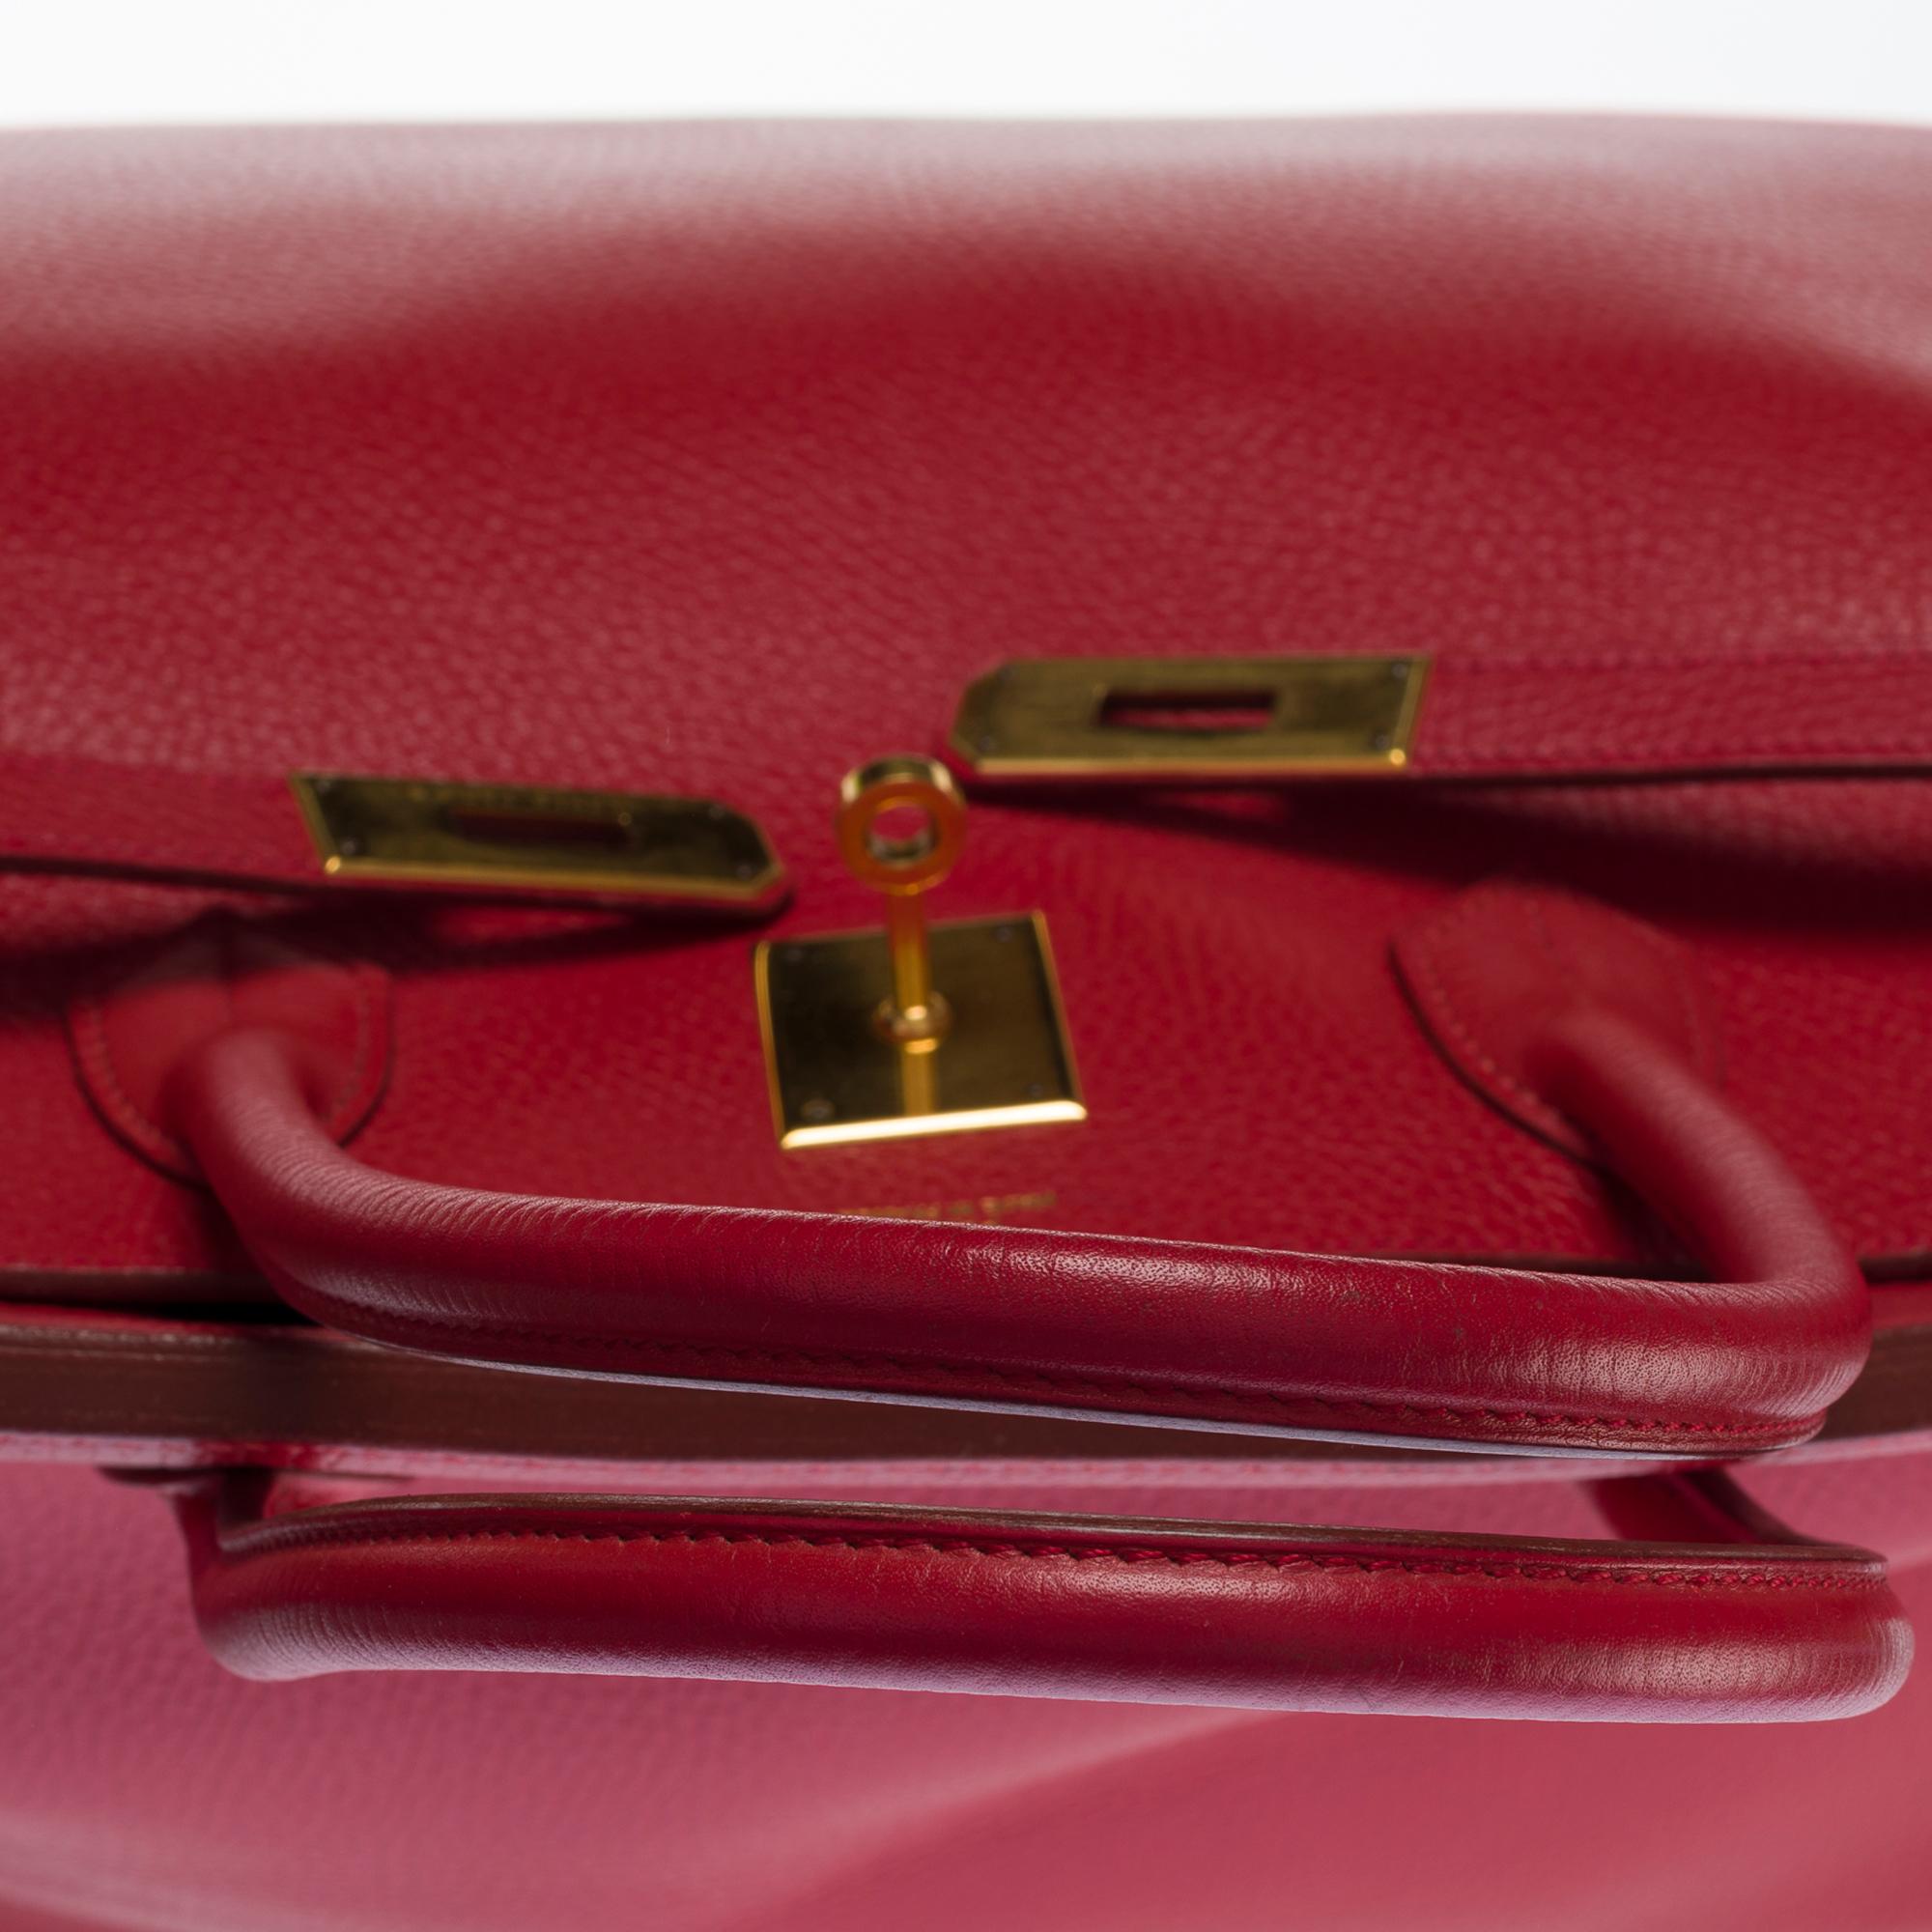 Rare & Collector Hermes Birkin 40cm handbag in Red Vache Ardennes leather, GHW For Sale 5